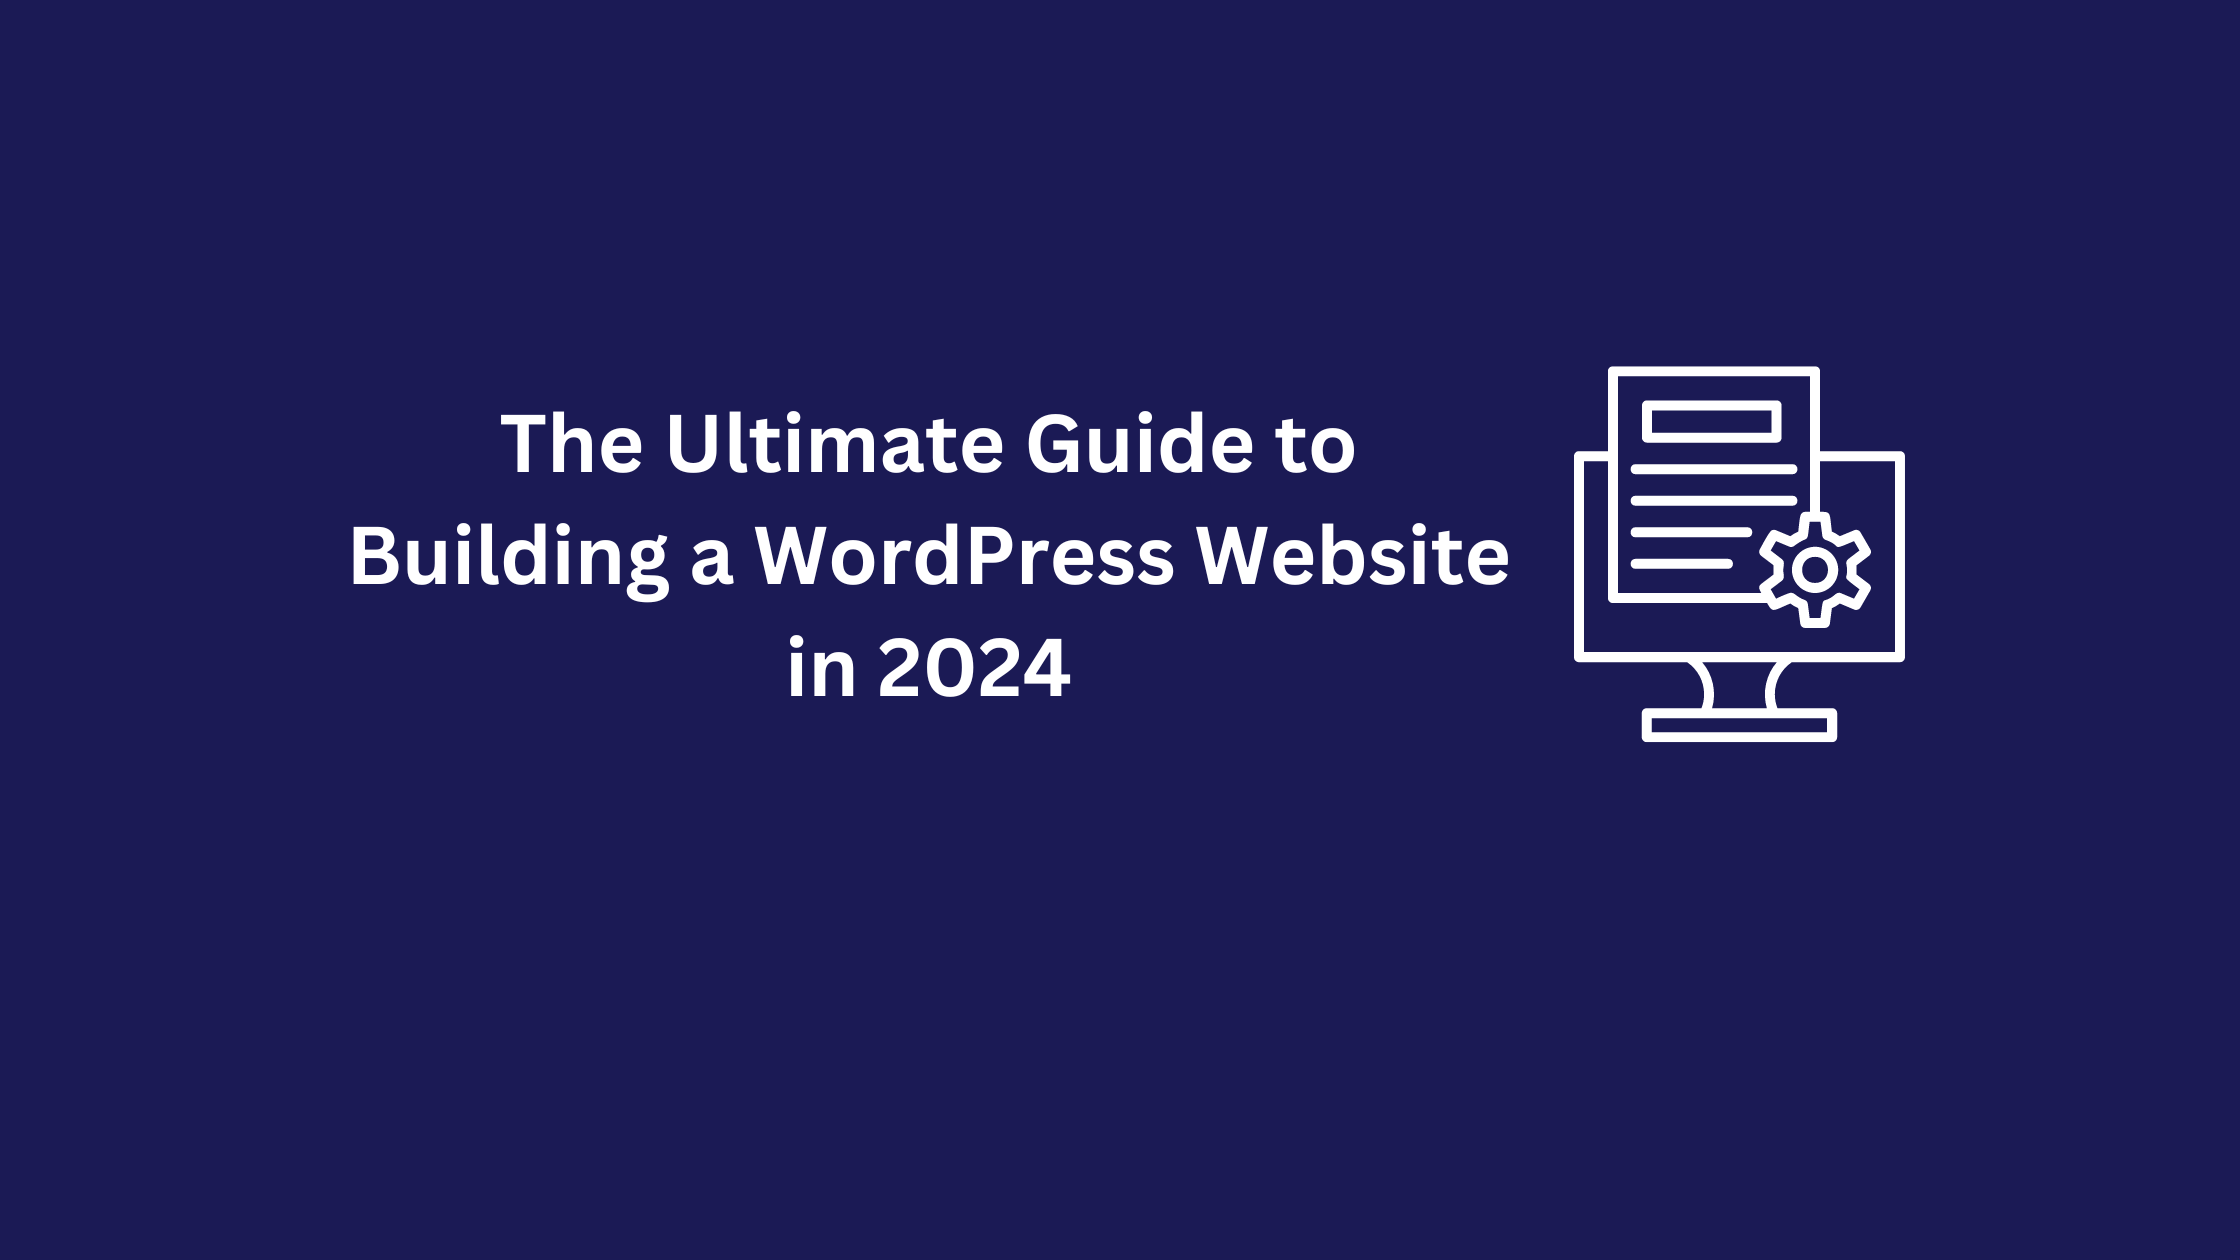 The Ultimate Guide to Building a WordPress Website in 2024